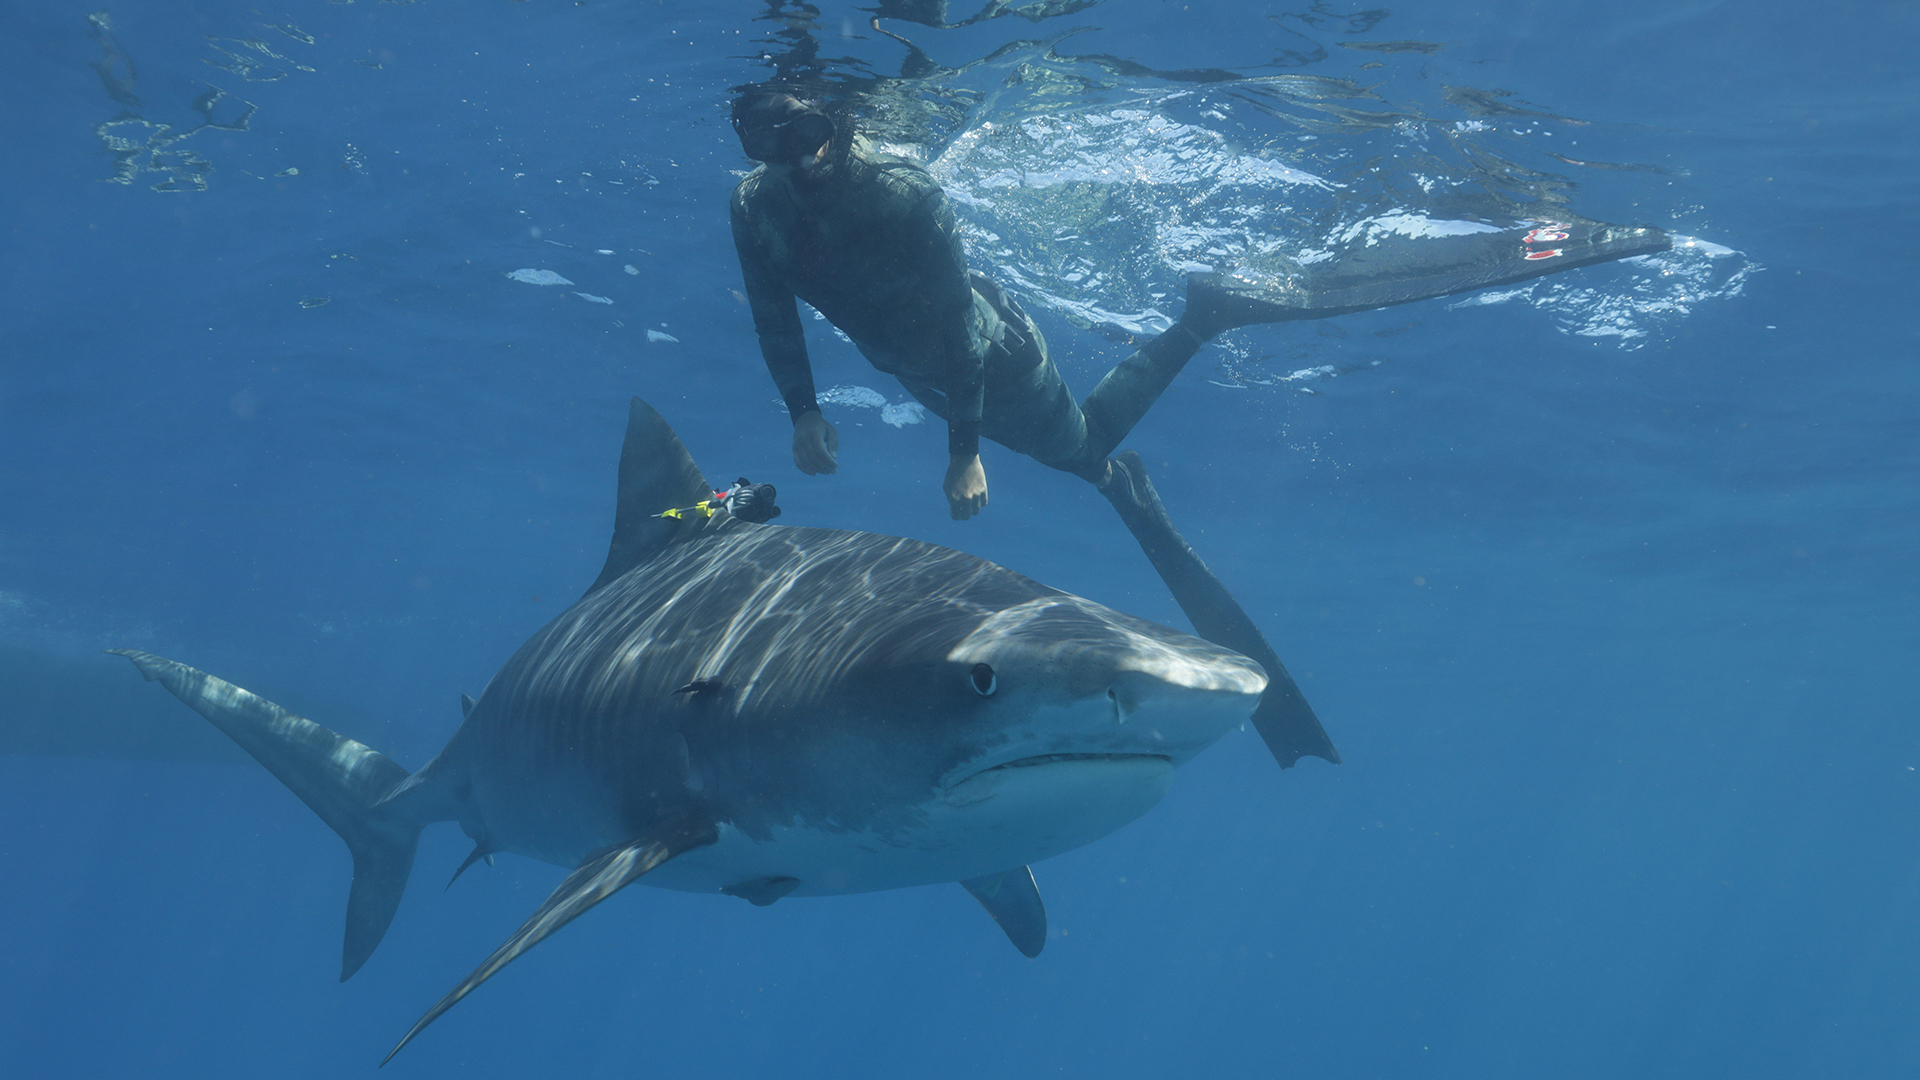 Hawaii Institute of Marine Biology Shark Lab researcher, Paige Wernli, observes a data... [Photo of the day - July 2022]